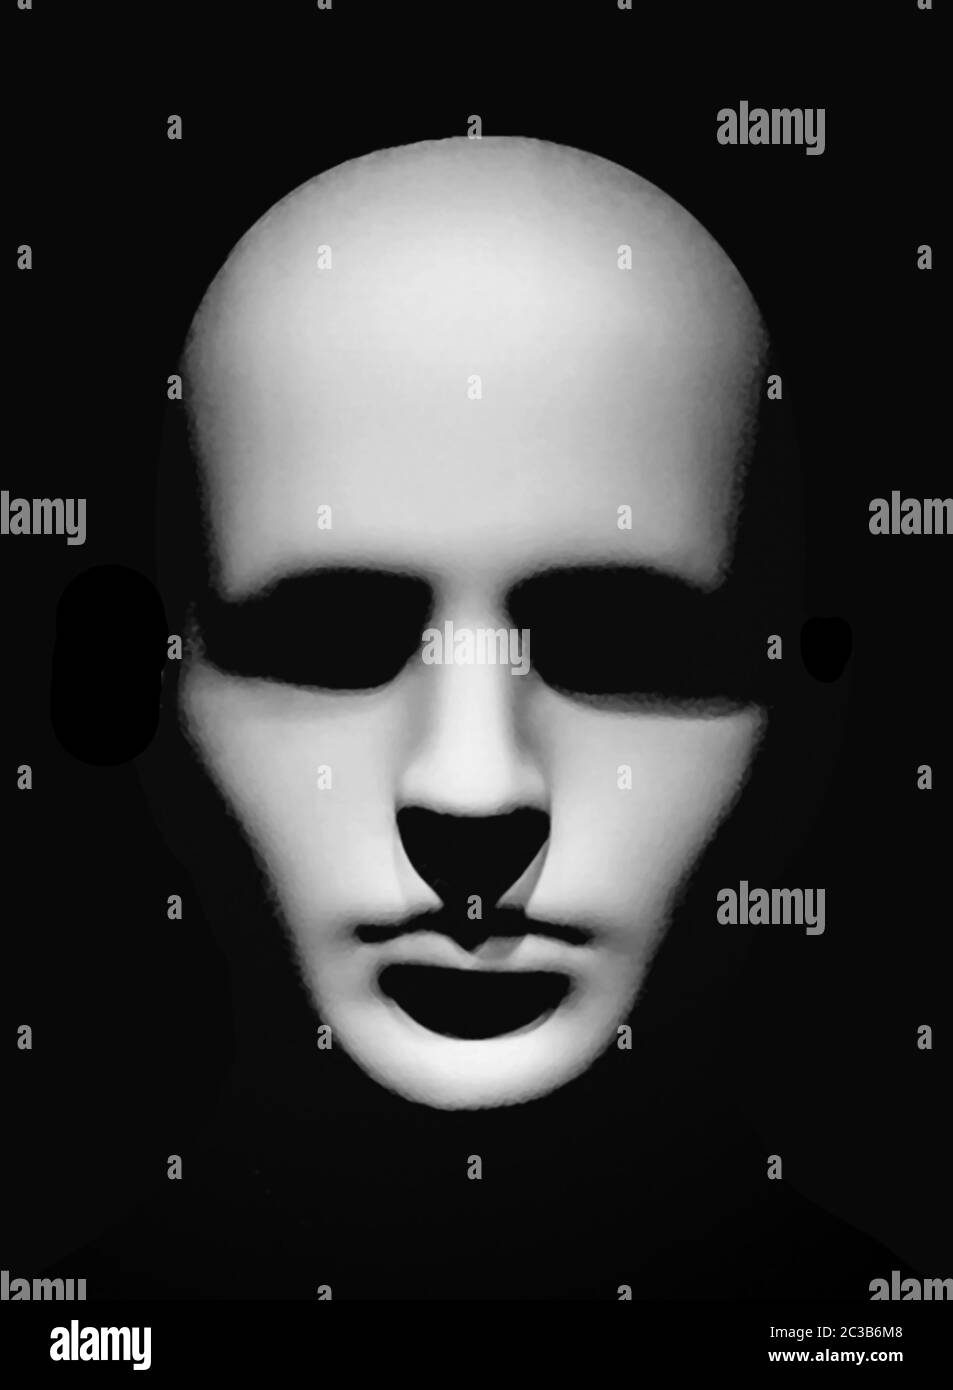 Eyes Closed Alien Head Scary Poster Stock Photo